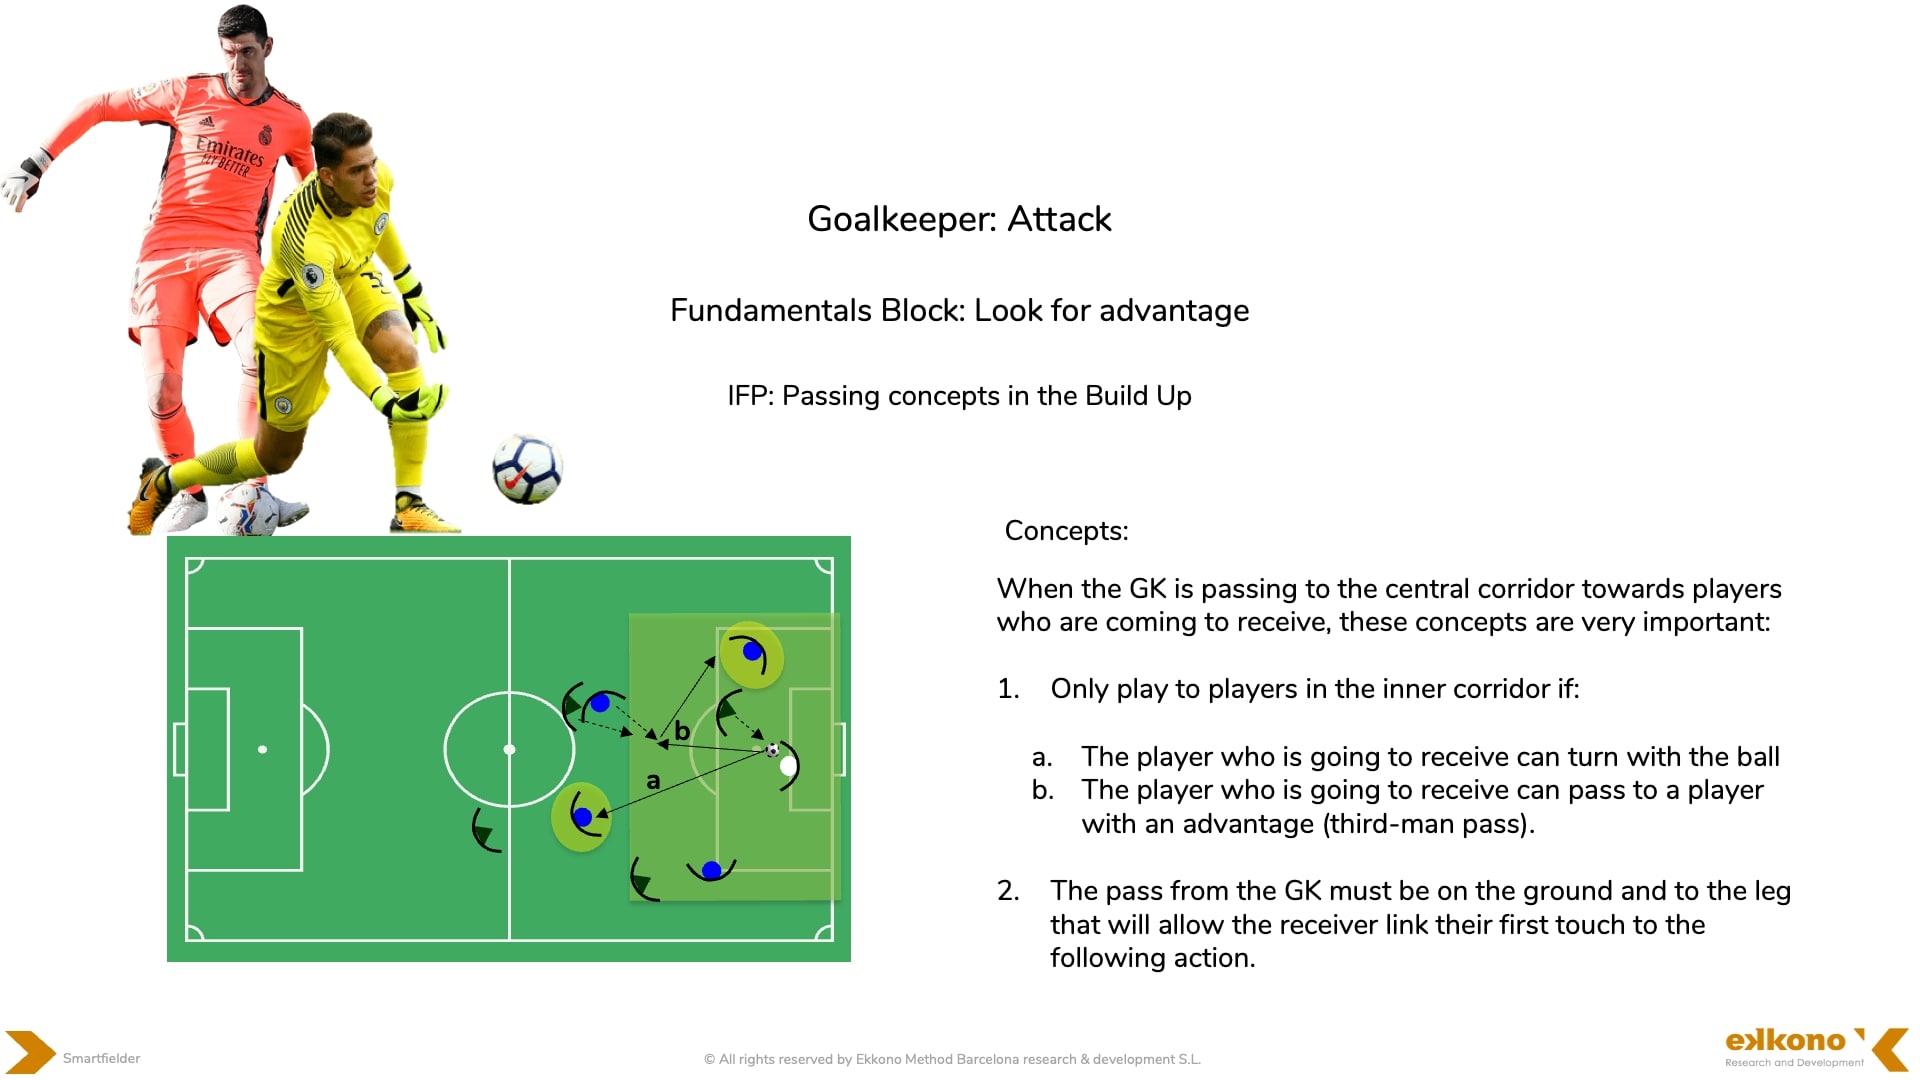 goaldkeeper attack analysis and concepts, explained by images